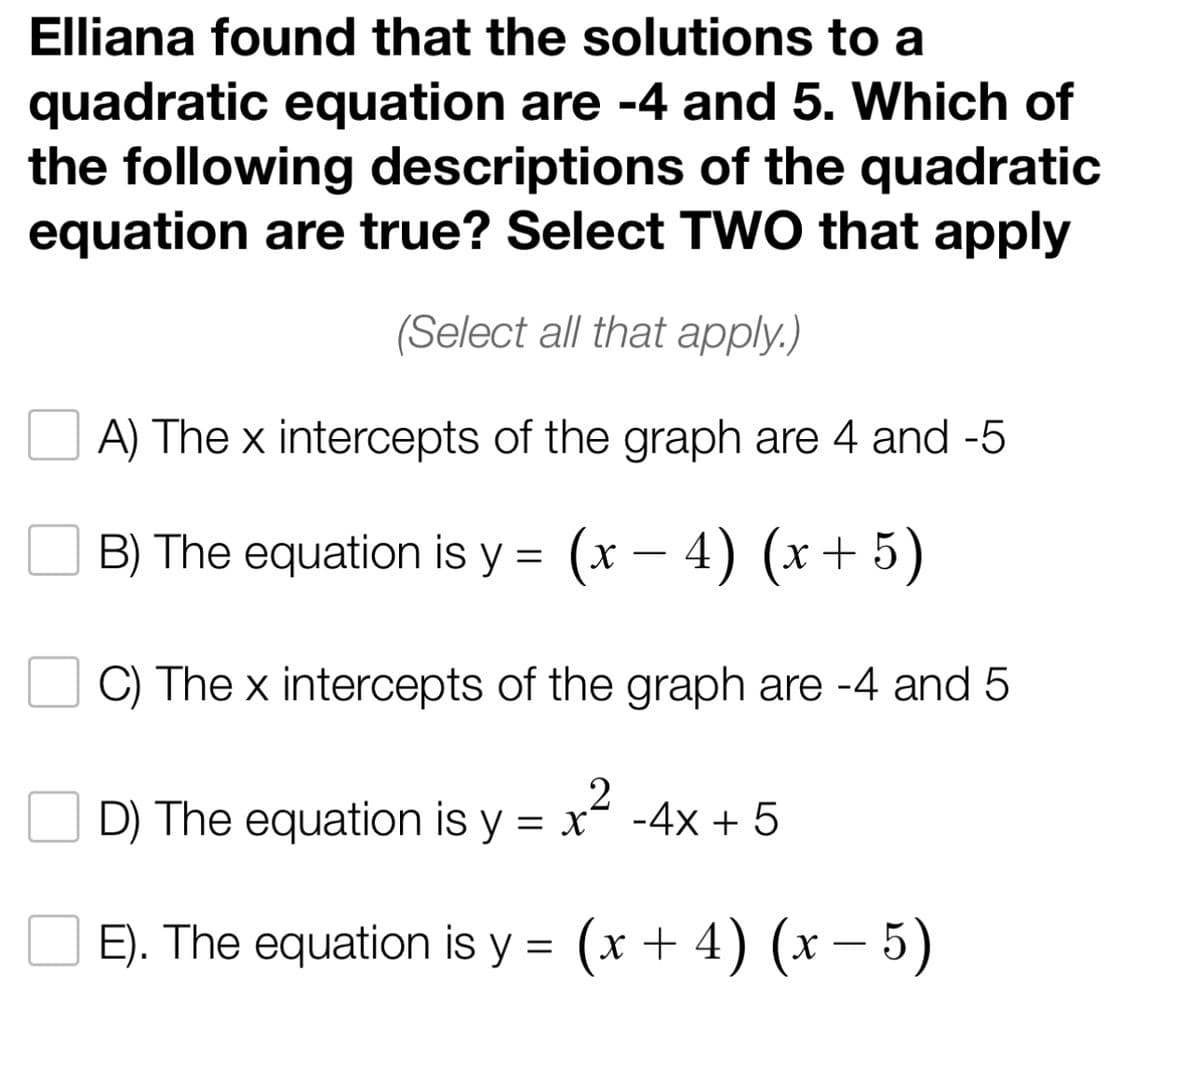 Elliana found that the solutions to a
quadratic equation are -4 and 5. Which of
the following descriptions of the quadratic
equation are true? Select TWO that apply
(Select all that apply.)
A) The x intercepts of the graph are 4 and -5
B) The equation is y = (x − 4) (x + 5)
C) The x intercepts of the graph are -4 and 5
2
D) The equation is y = x² - 4x + 5
E). The equation is y = (x + 4) (x - 5)